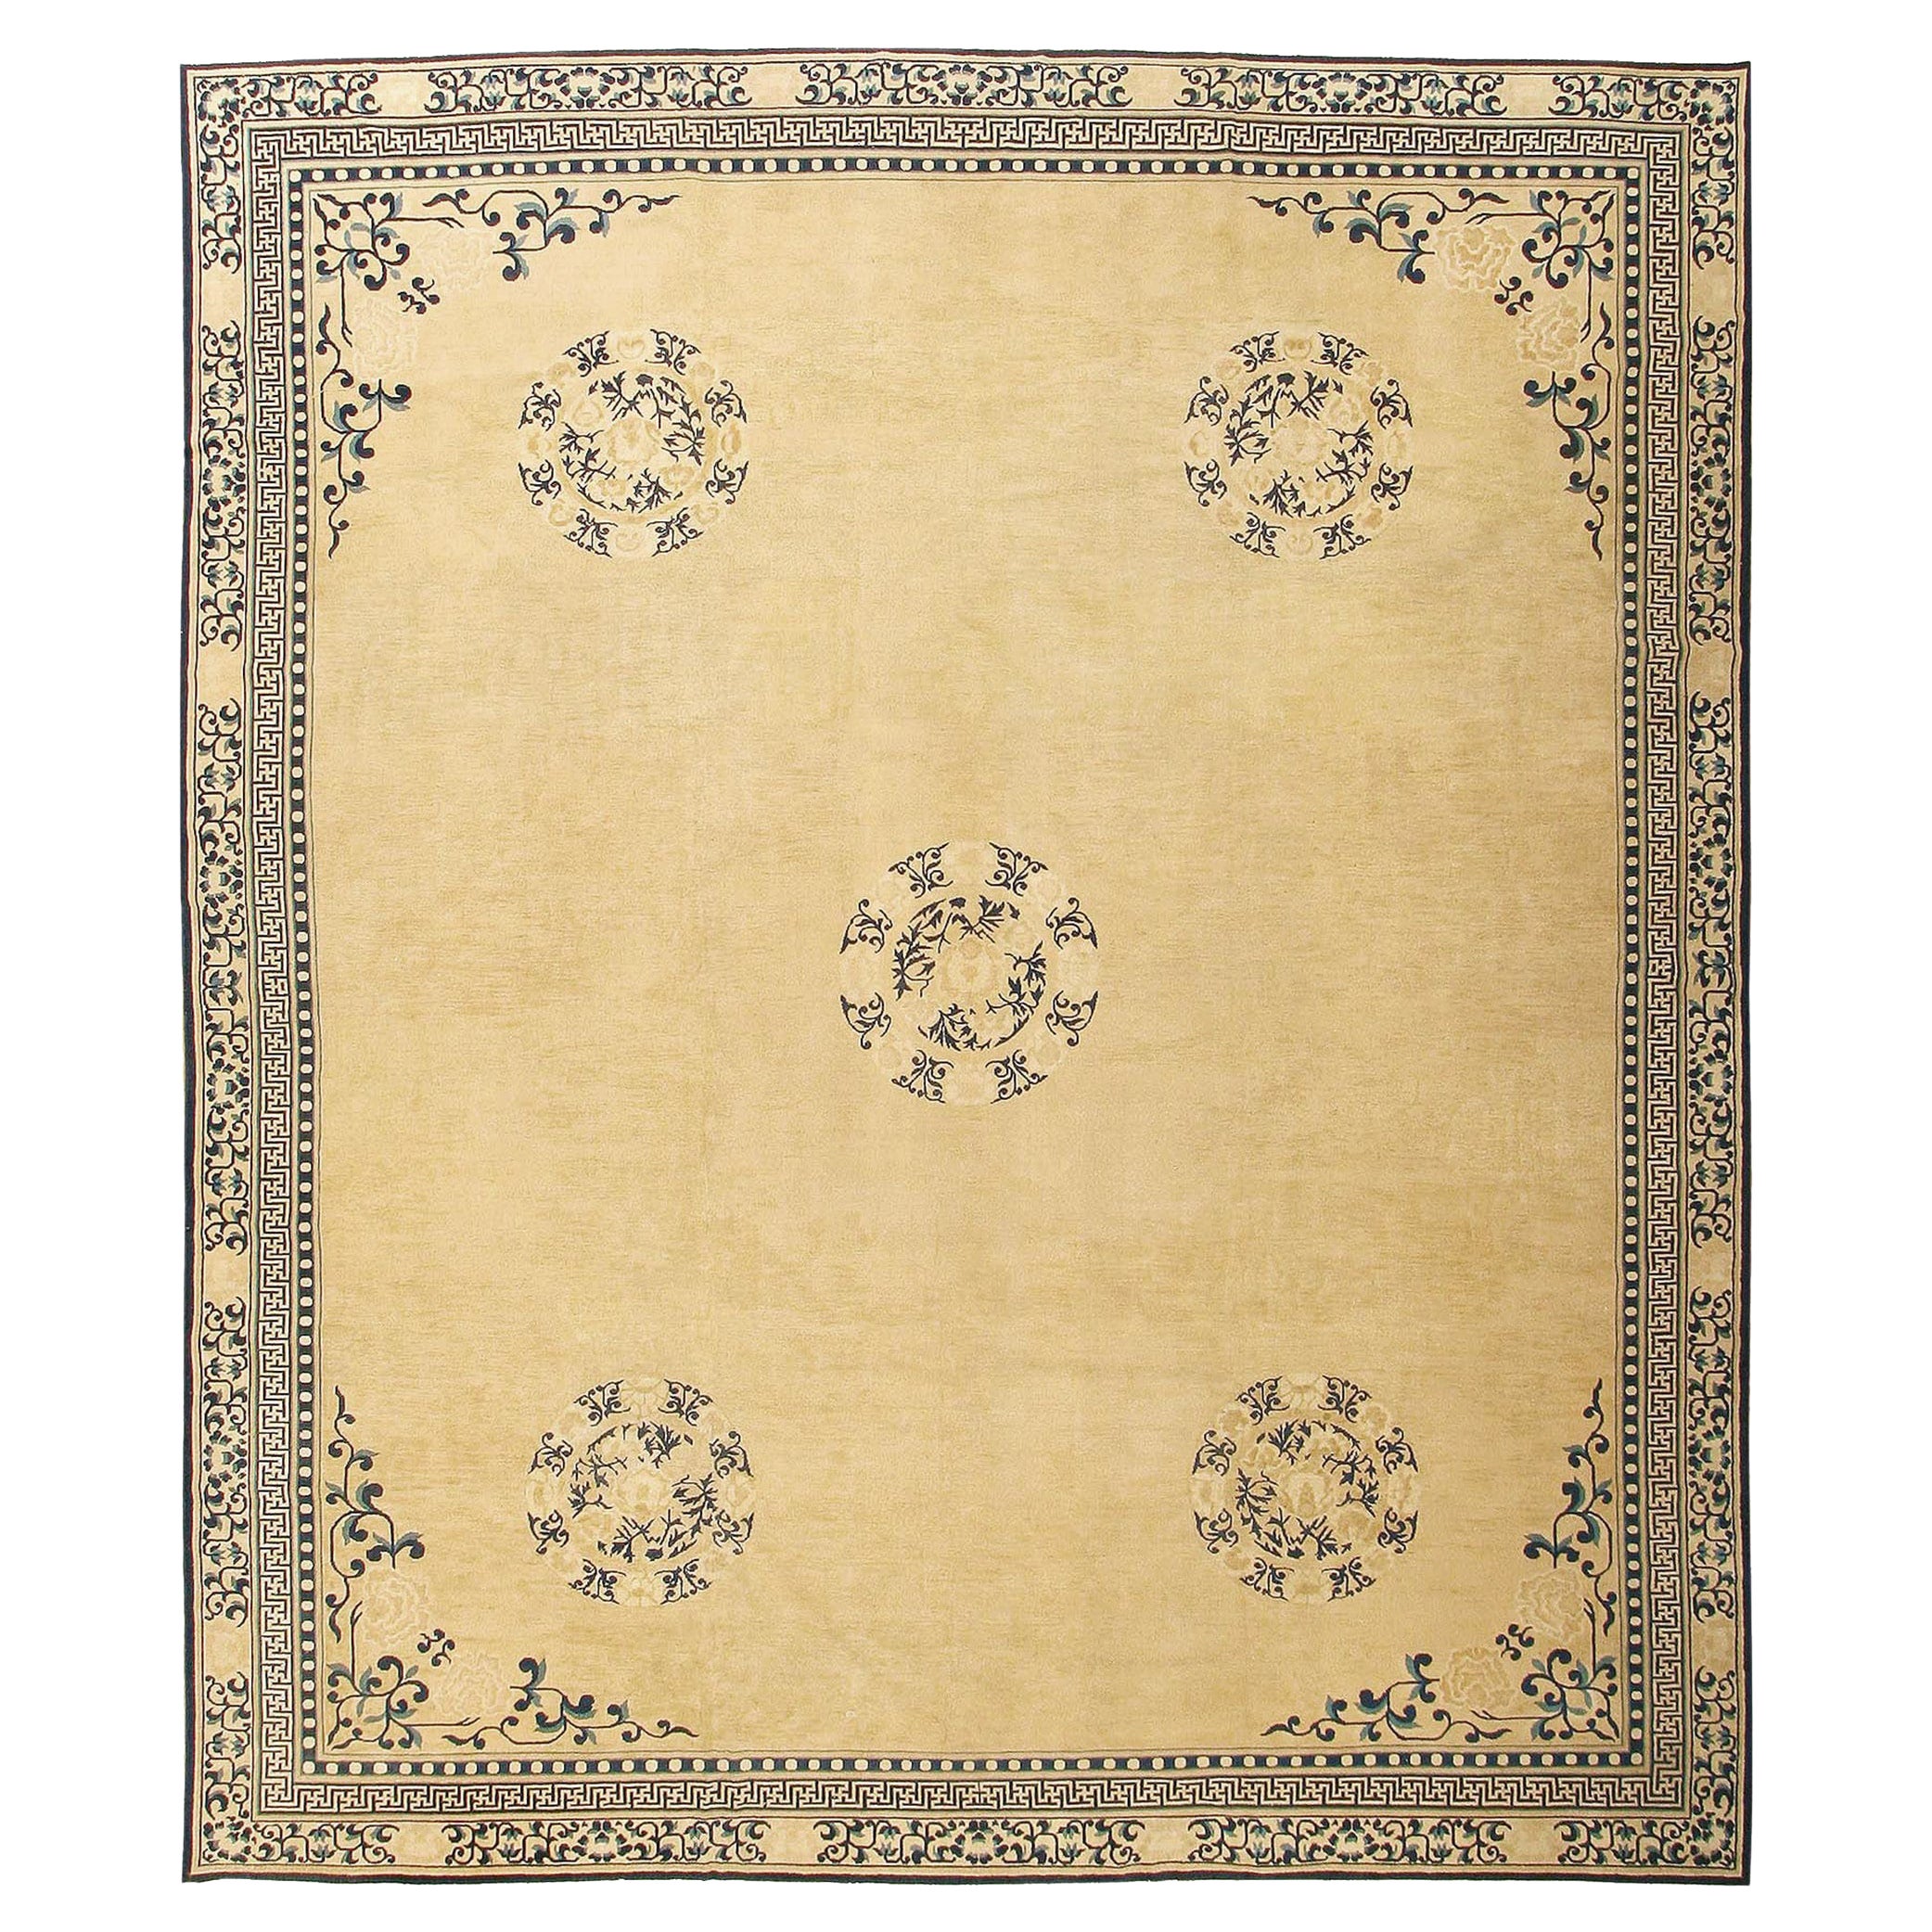 Neutral Quite Decorative Beautiful Antique Chinese Design Rug 13'10" x 15'11" For Sale